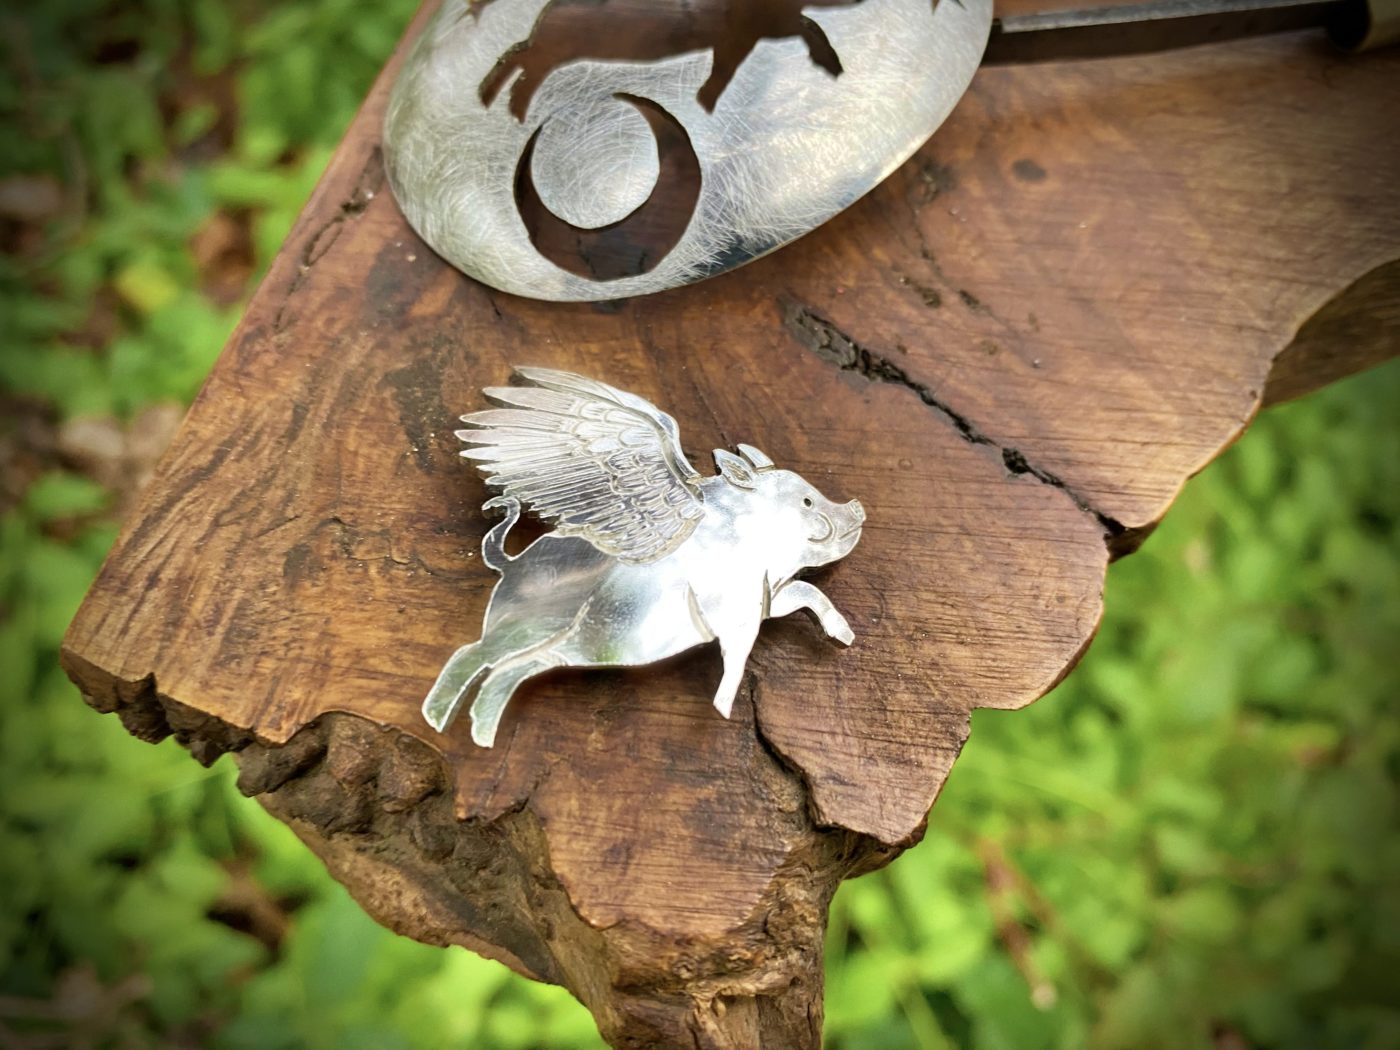 The Flying pig of disbelief. Handcrafted and ethically produced from a recycled vintage antique spoon